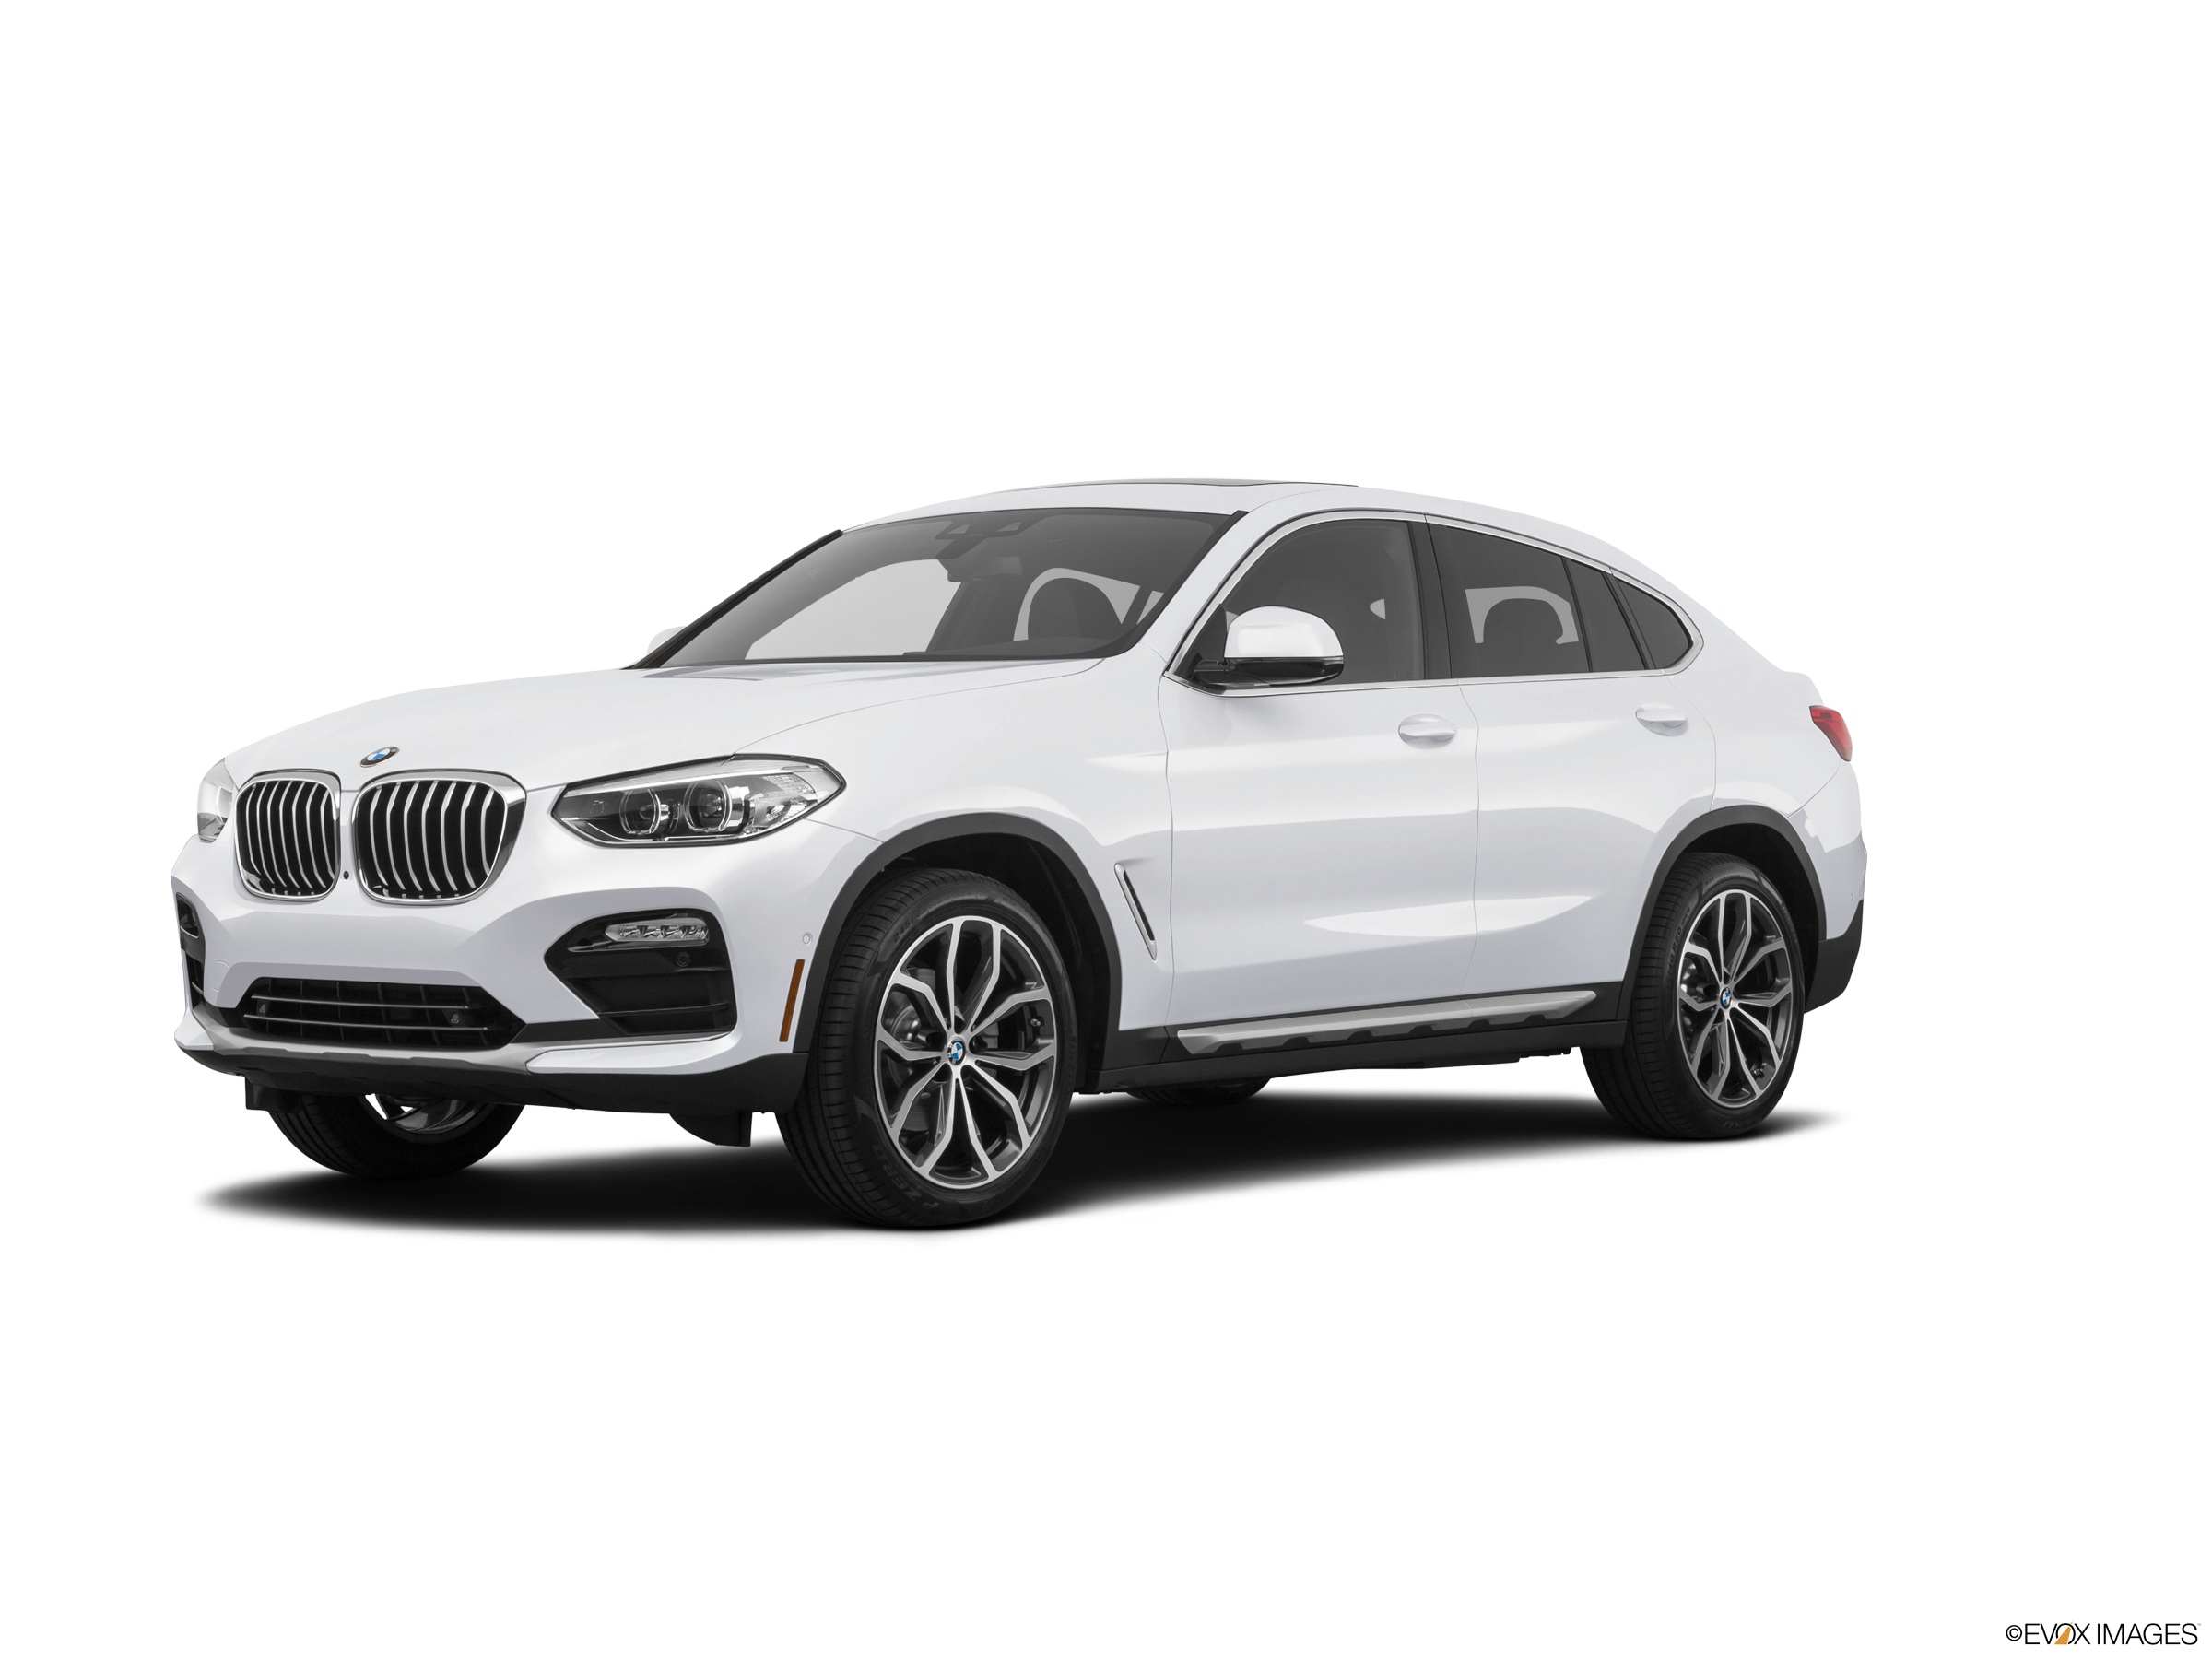 2019 BMW X4 M40i Review: 5 Things You Need To Know